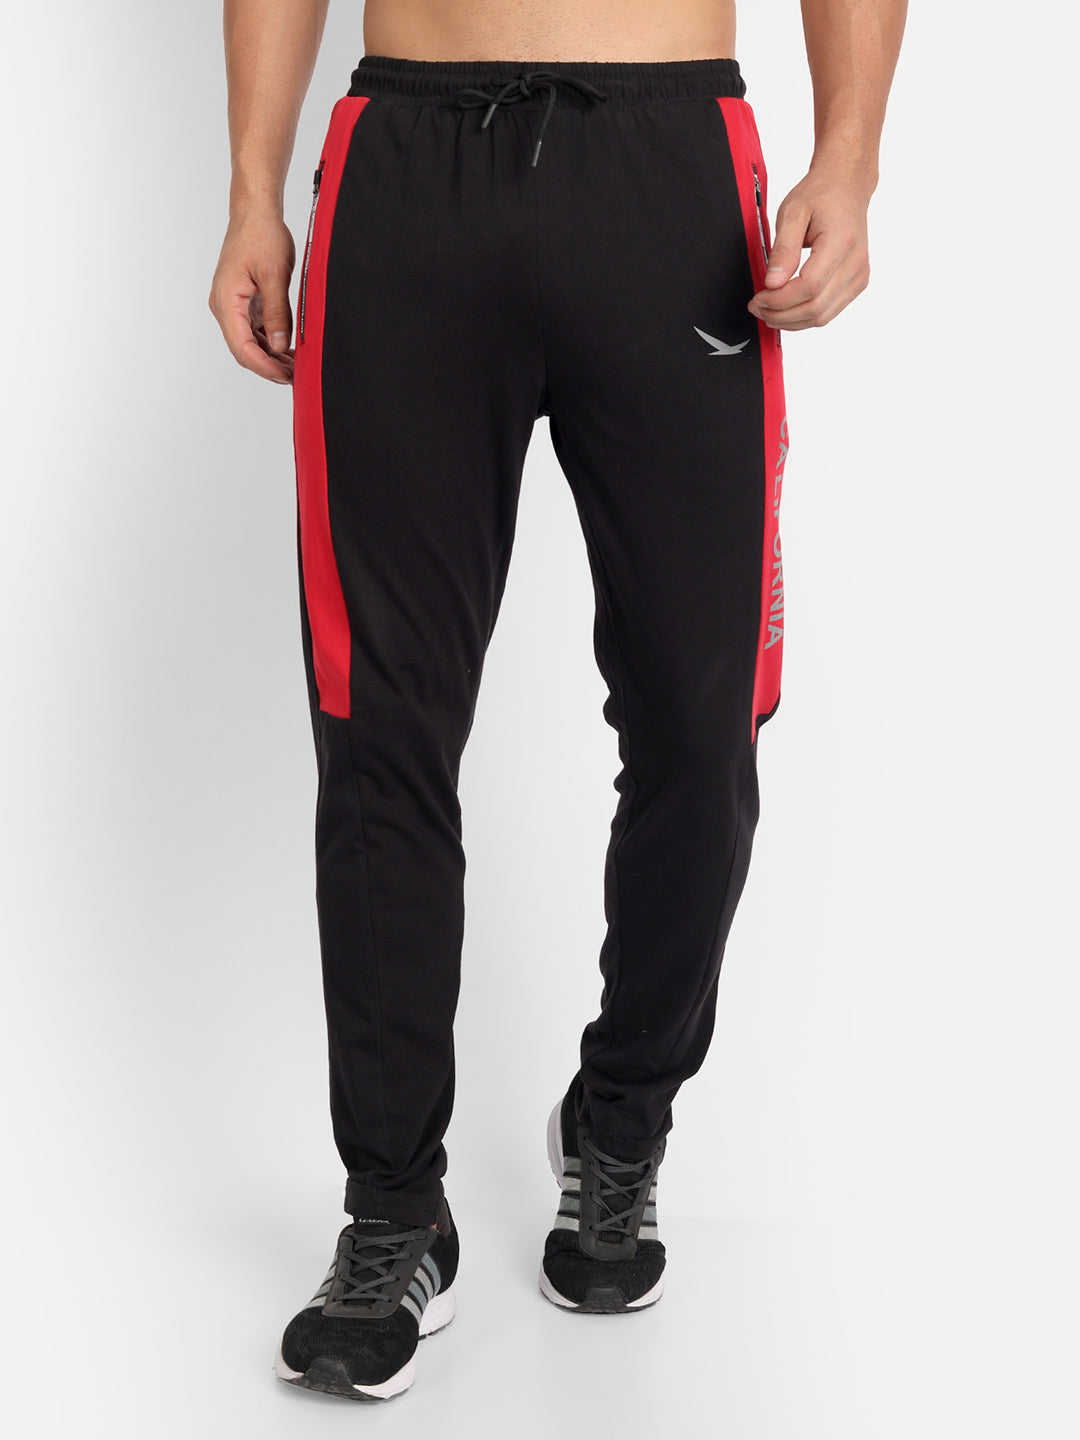 Buy Olive Track Pants for Men by French Connection Online  Ajiocom